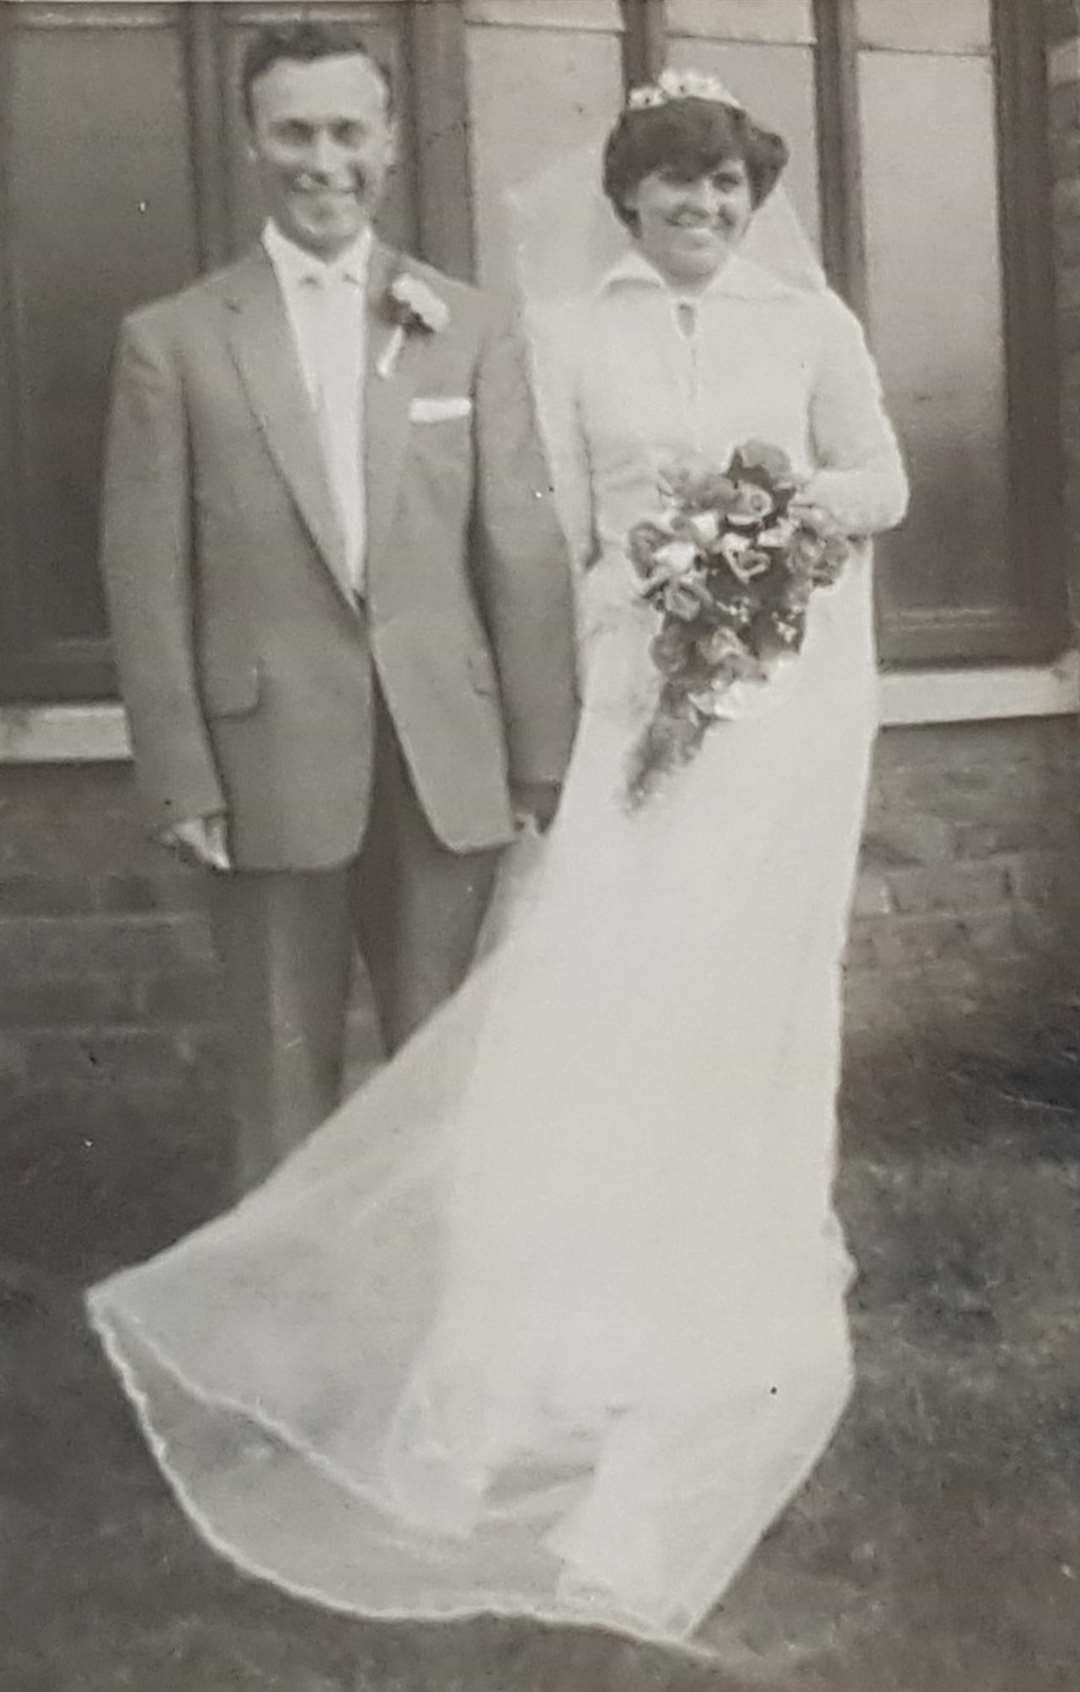 Ken and Shirley Berry on their wedding day at St Justus Church Rochester, June, 21, 1958 (2814560)